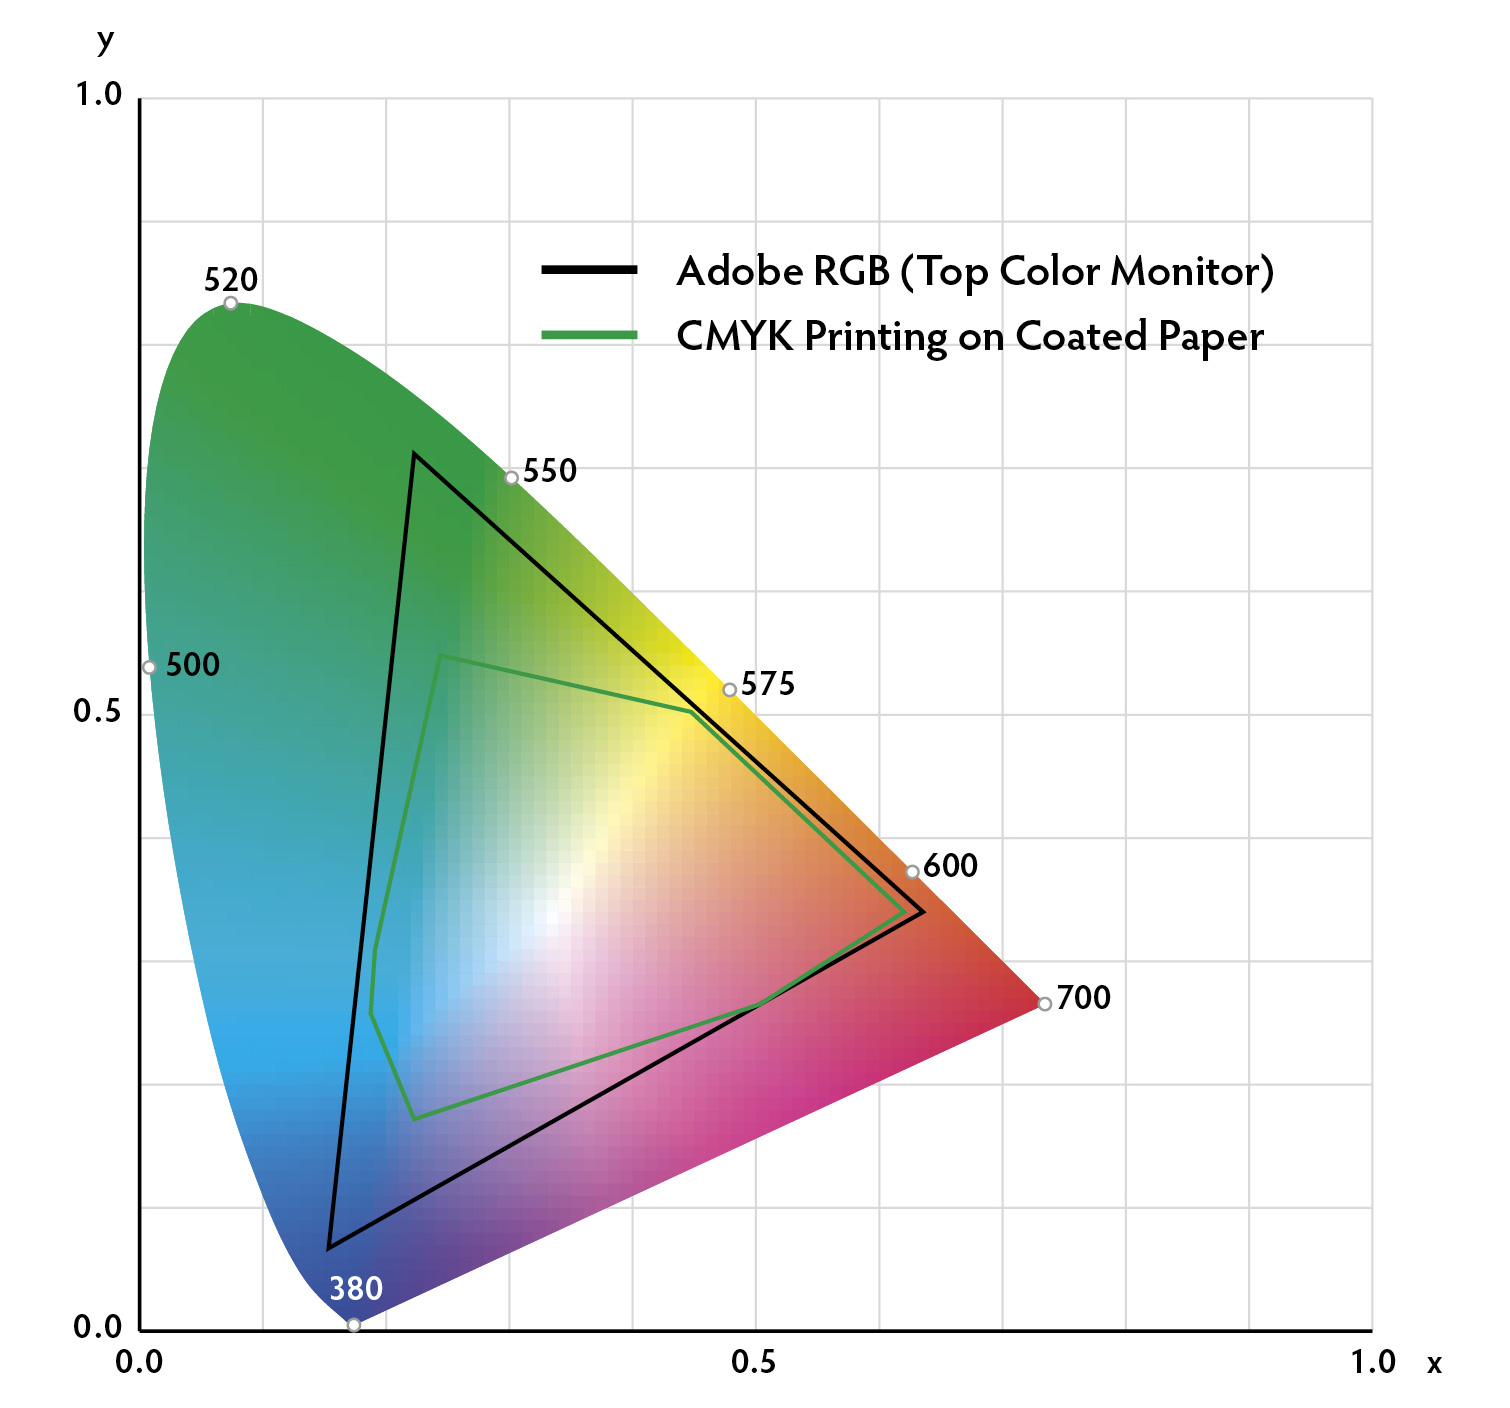 The CIE (International Commission on Illumination, a.k.a. Commission International de l’Éclairage) chromaticity diagram is used to specify the exact position of all colors visible to the human eye. Note that a computer monitor (represented by Adobe RGB) can display only the colors inside the black line. The colors that can be printed using the standard CMYK printing process is even further restricted to those colors inside the green line. Many rubies and sapphires feature colors outside of both of these “gamuts.” Thus judgment must be made by personal examination, rather than via printed photos or digital images.